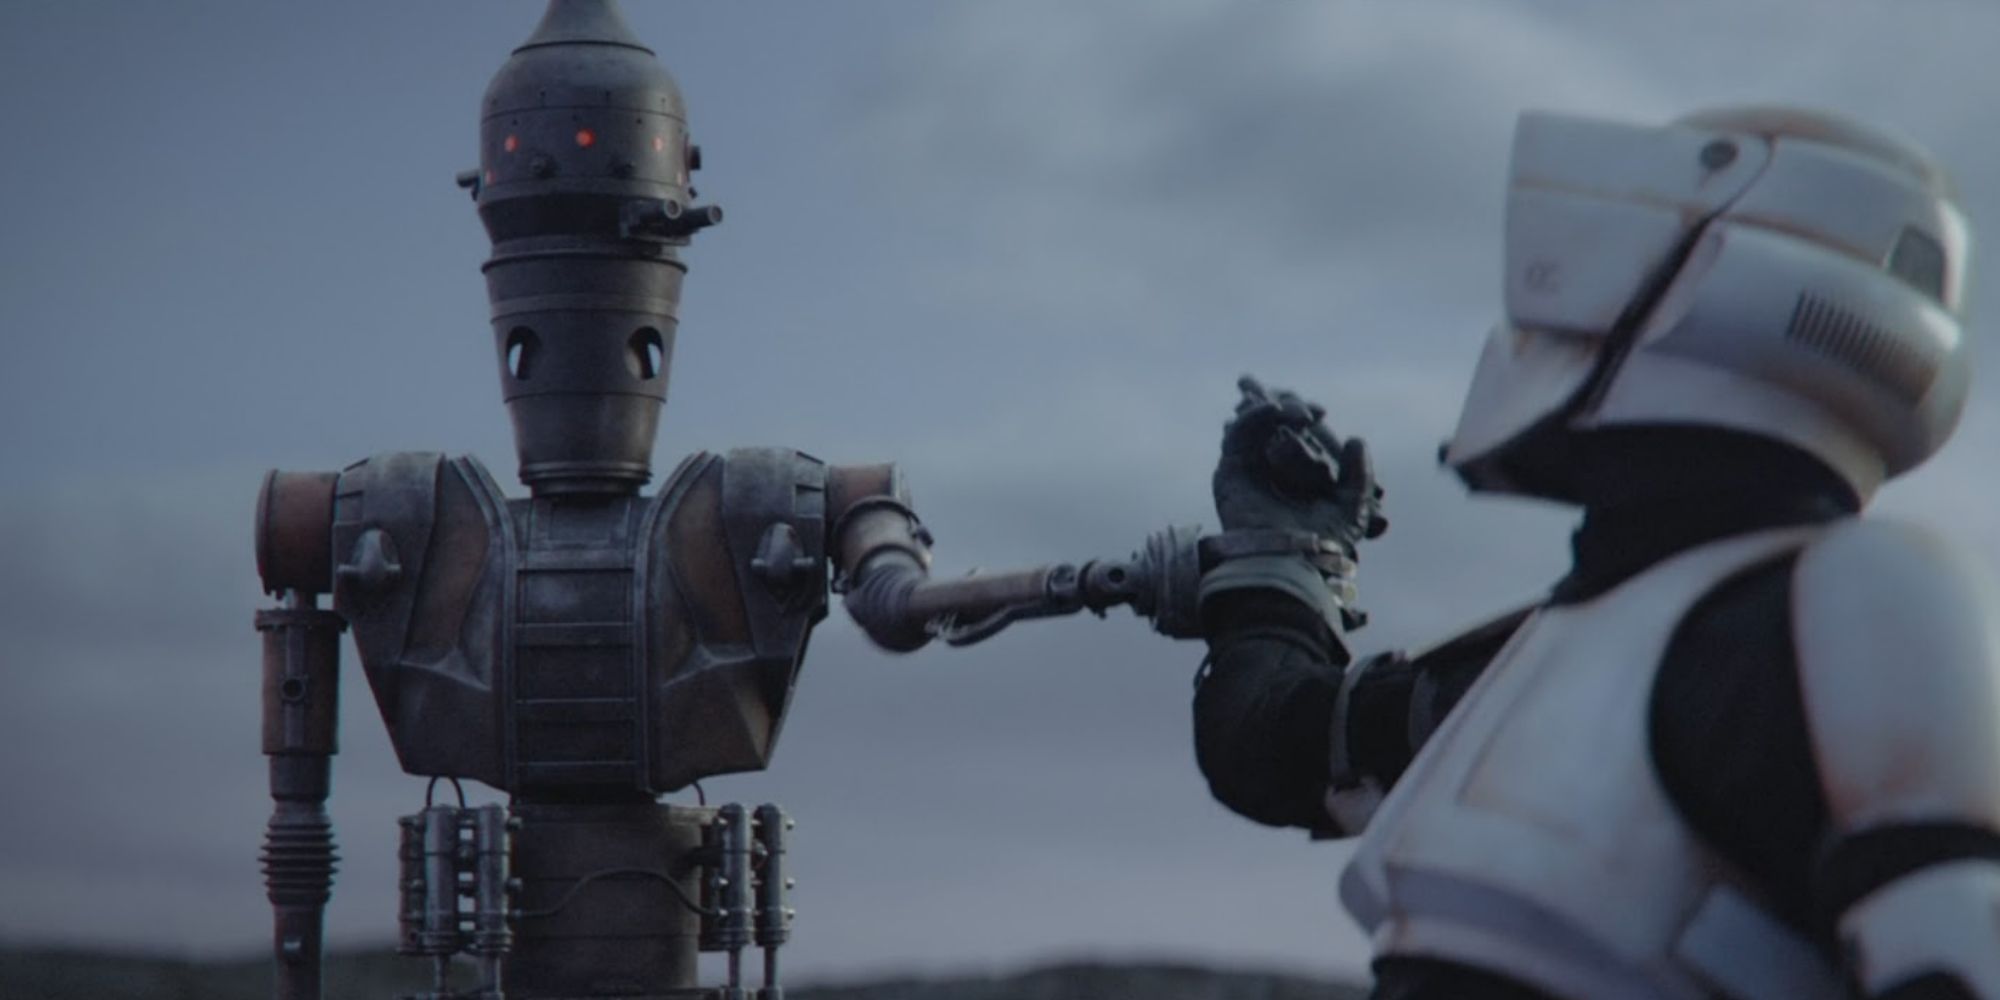 IG-11 fights a Scout Trooper in The Mandalorian